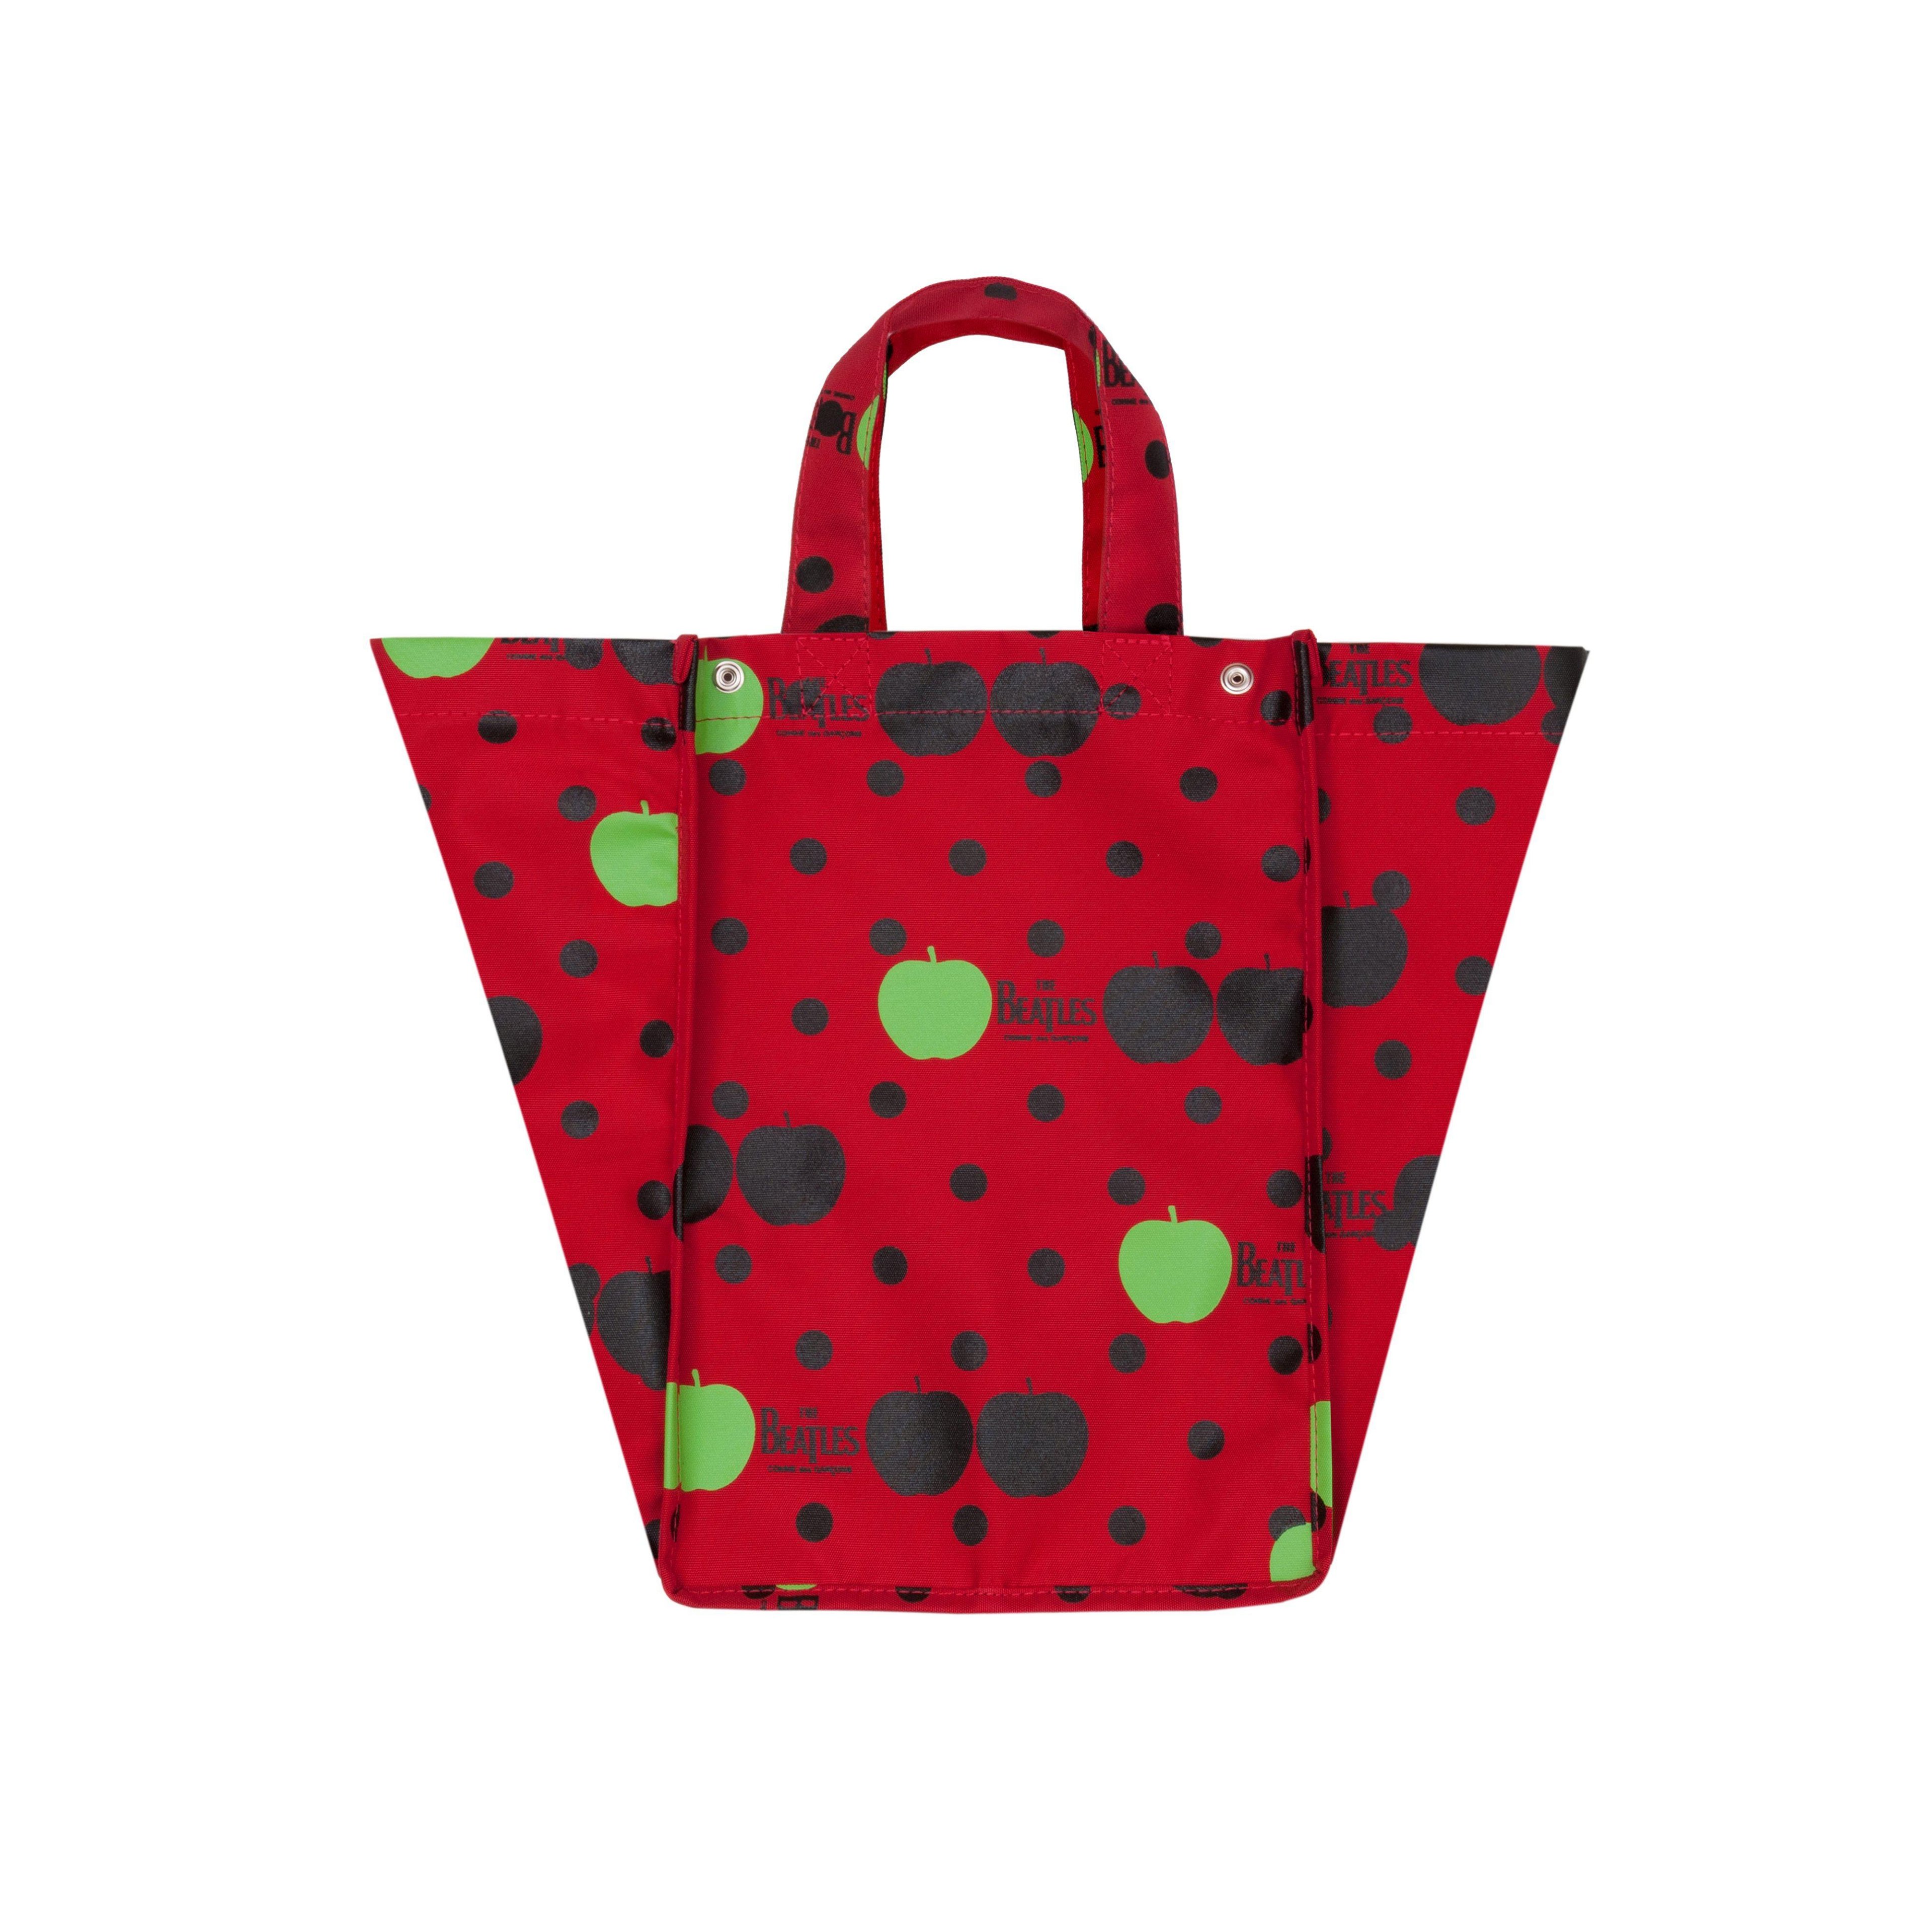 CDG Beatles - Tote Bag - (Red) by COMME DES GARCONS